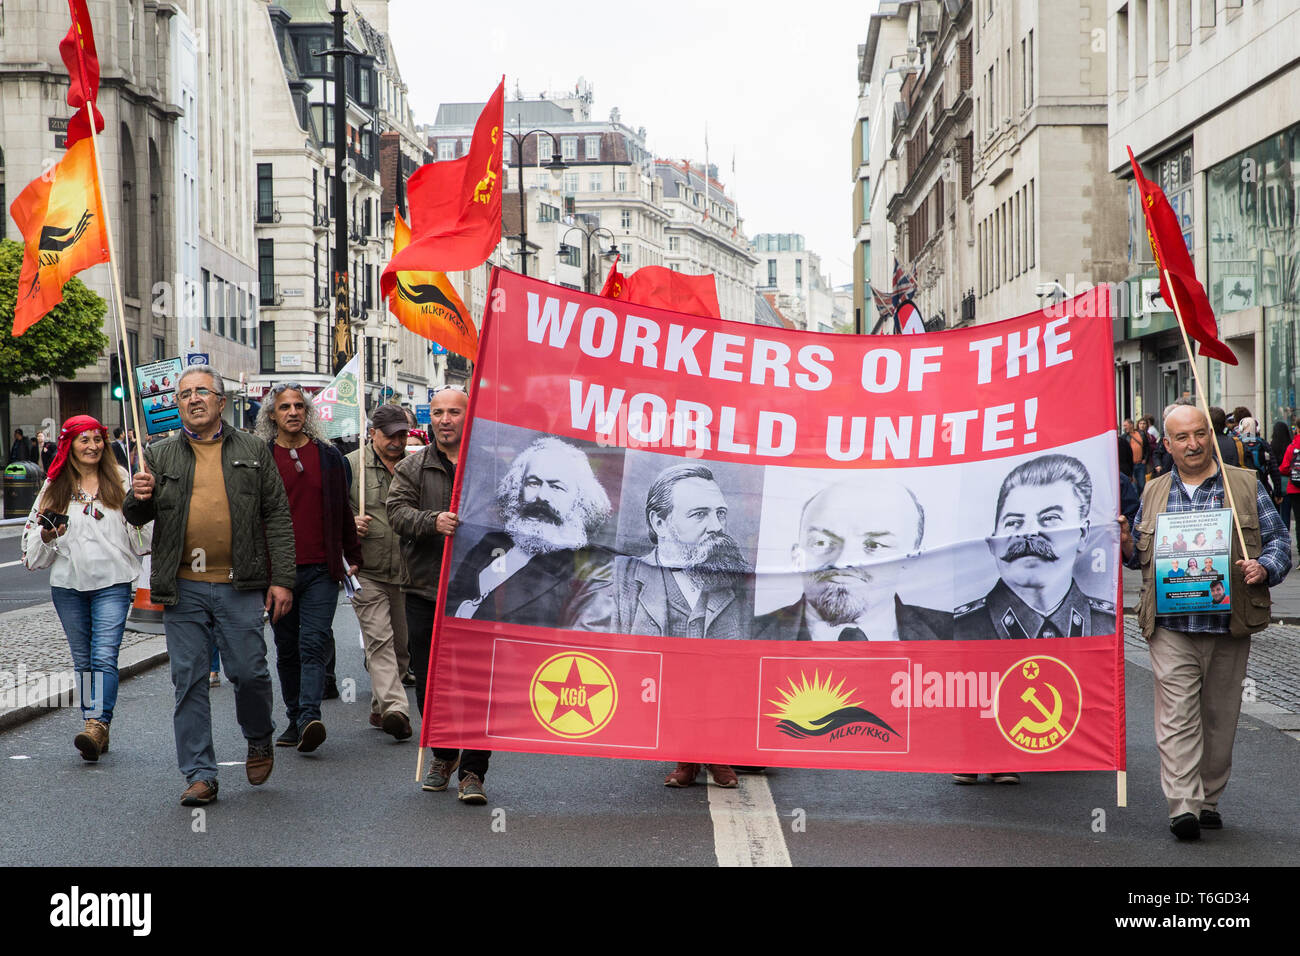 London, UK. 1st May, 2019. Representatives of trade unions and socialist and communist parties from many different countries take part in the annual May Day march and rally to mark International Workers' Day. Credit: Mark Kerrison/Alamy Live News Stock Photo